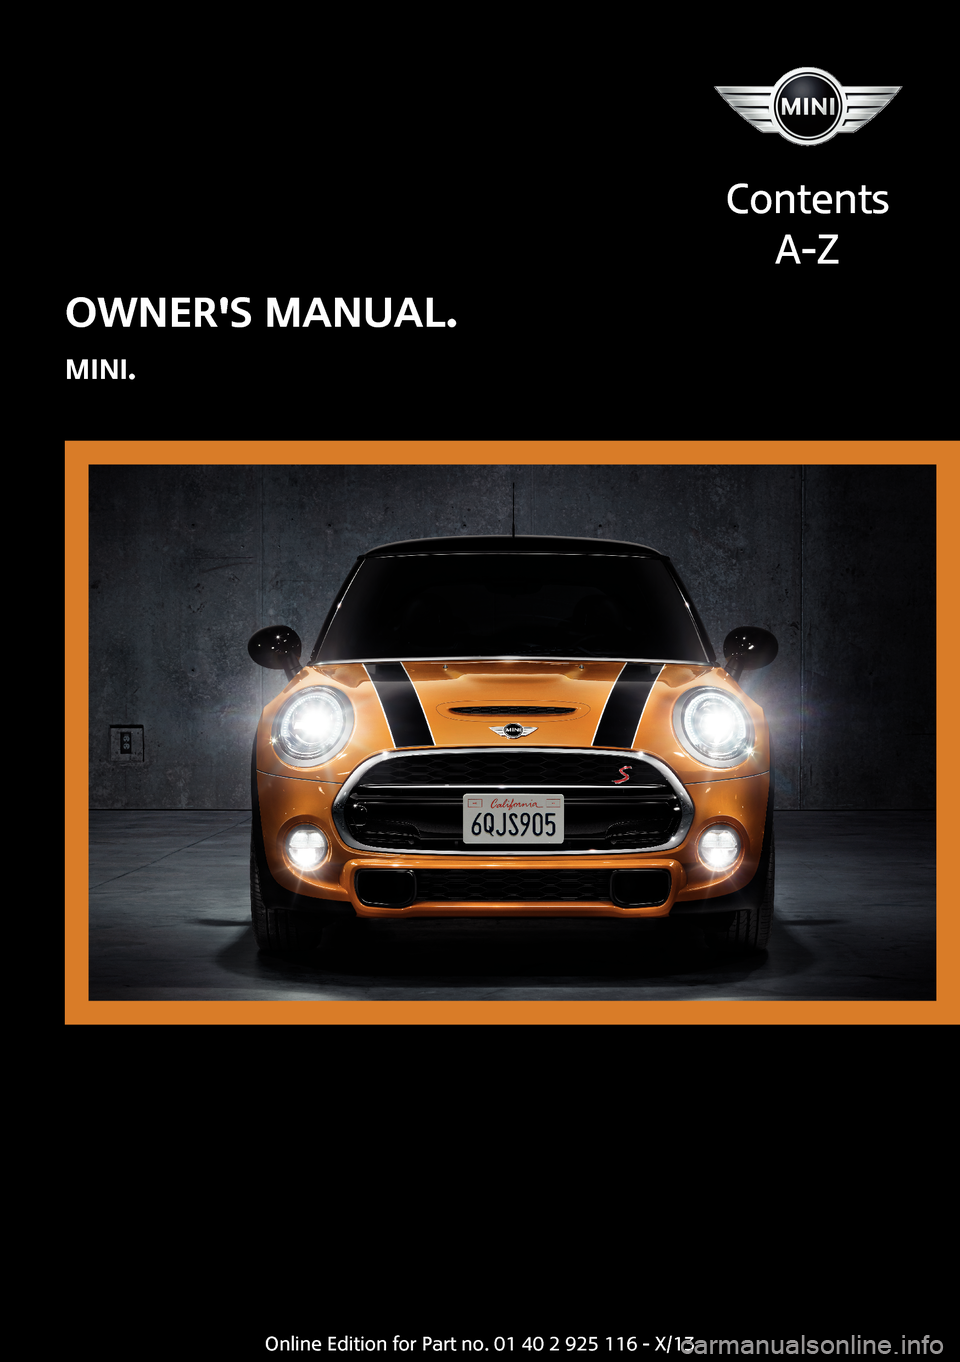 MINI 3 door 2013  Owners Manual OWNERS MANUAL.
MINI.
Contents
A-Z
Online Edition for Part no. 01 40 2 925 116 - X/13  